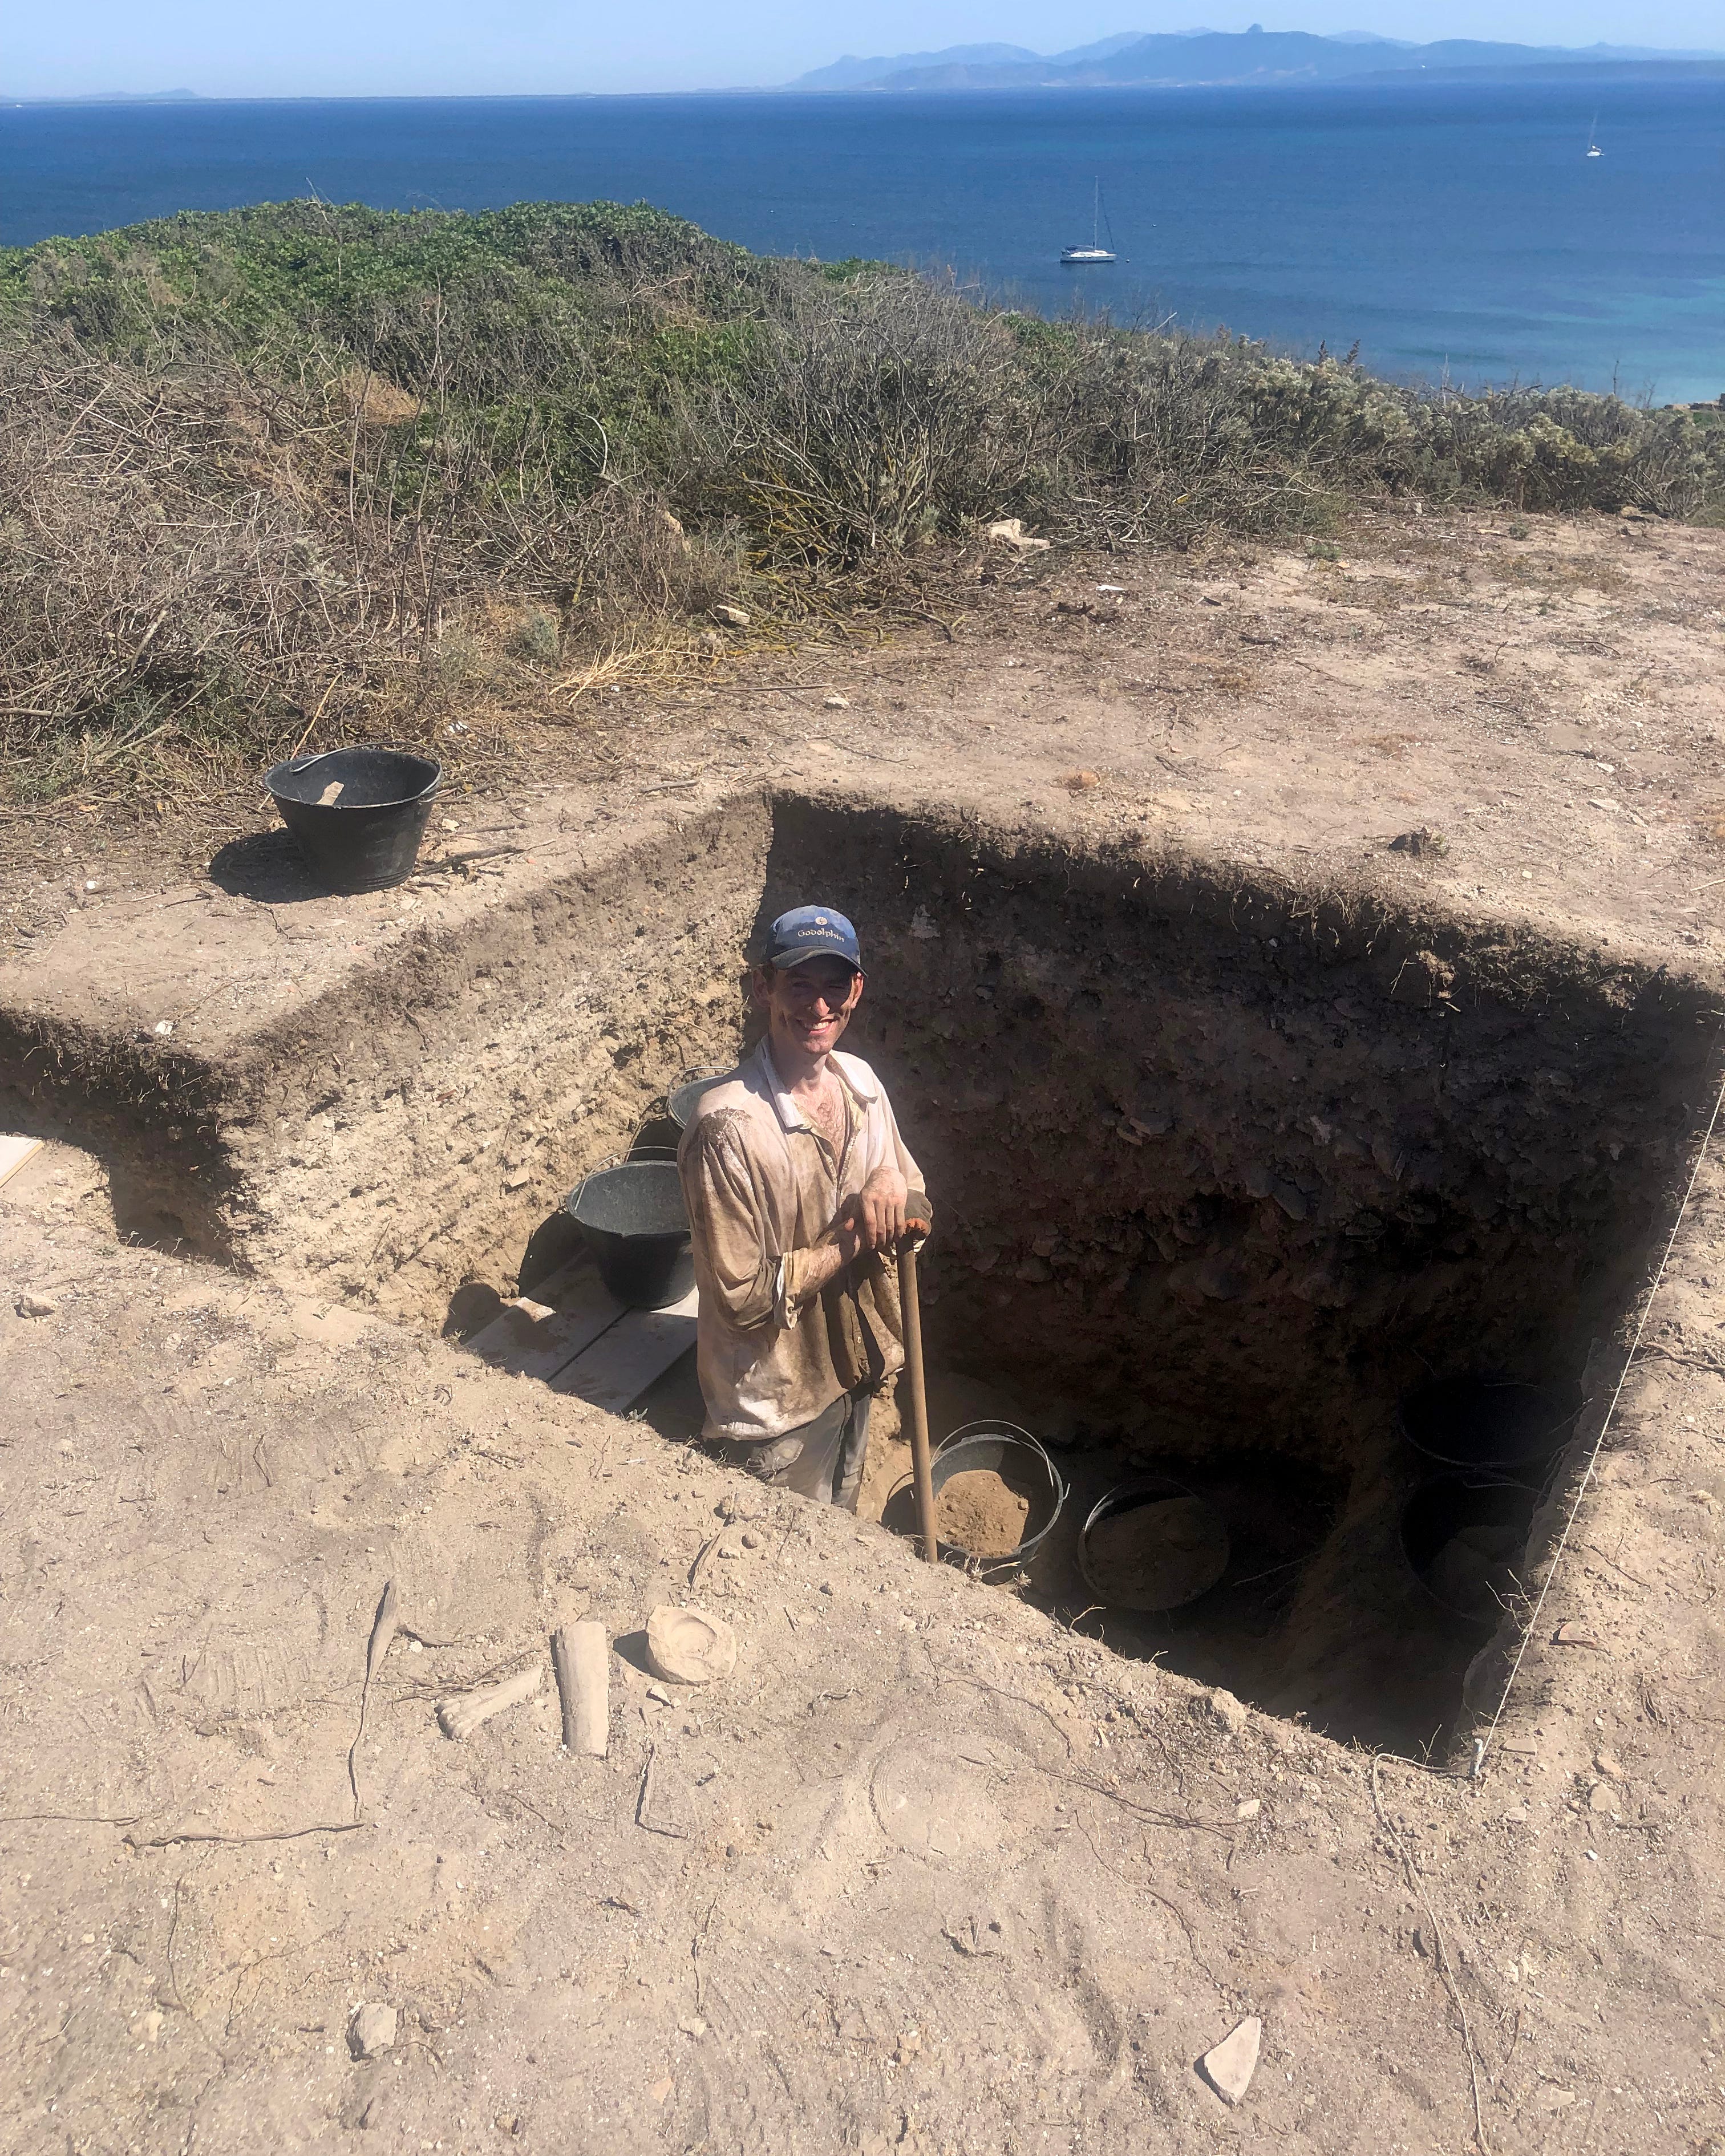 Patrick Hayes, working in Trench 6000, digs within view of the Mediterranean.